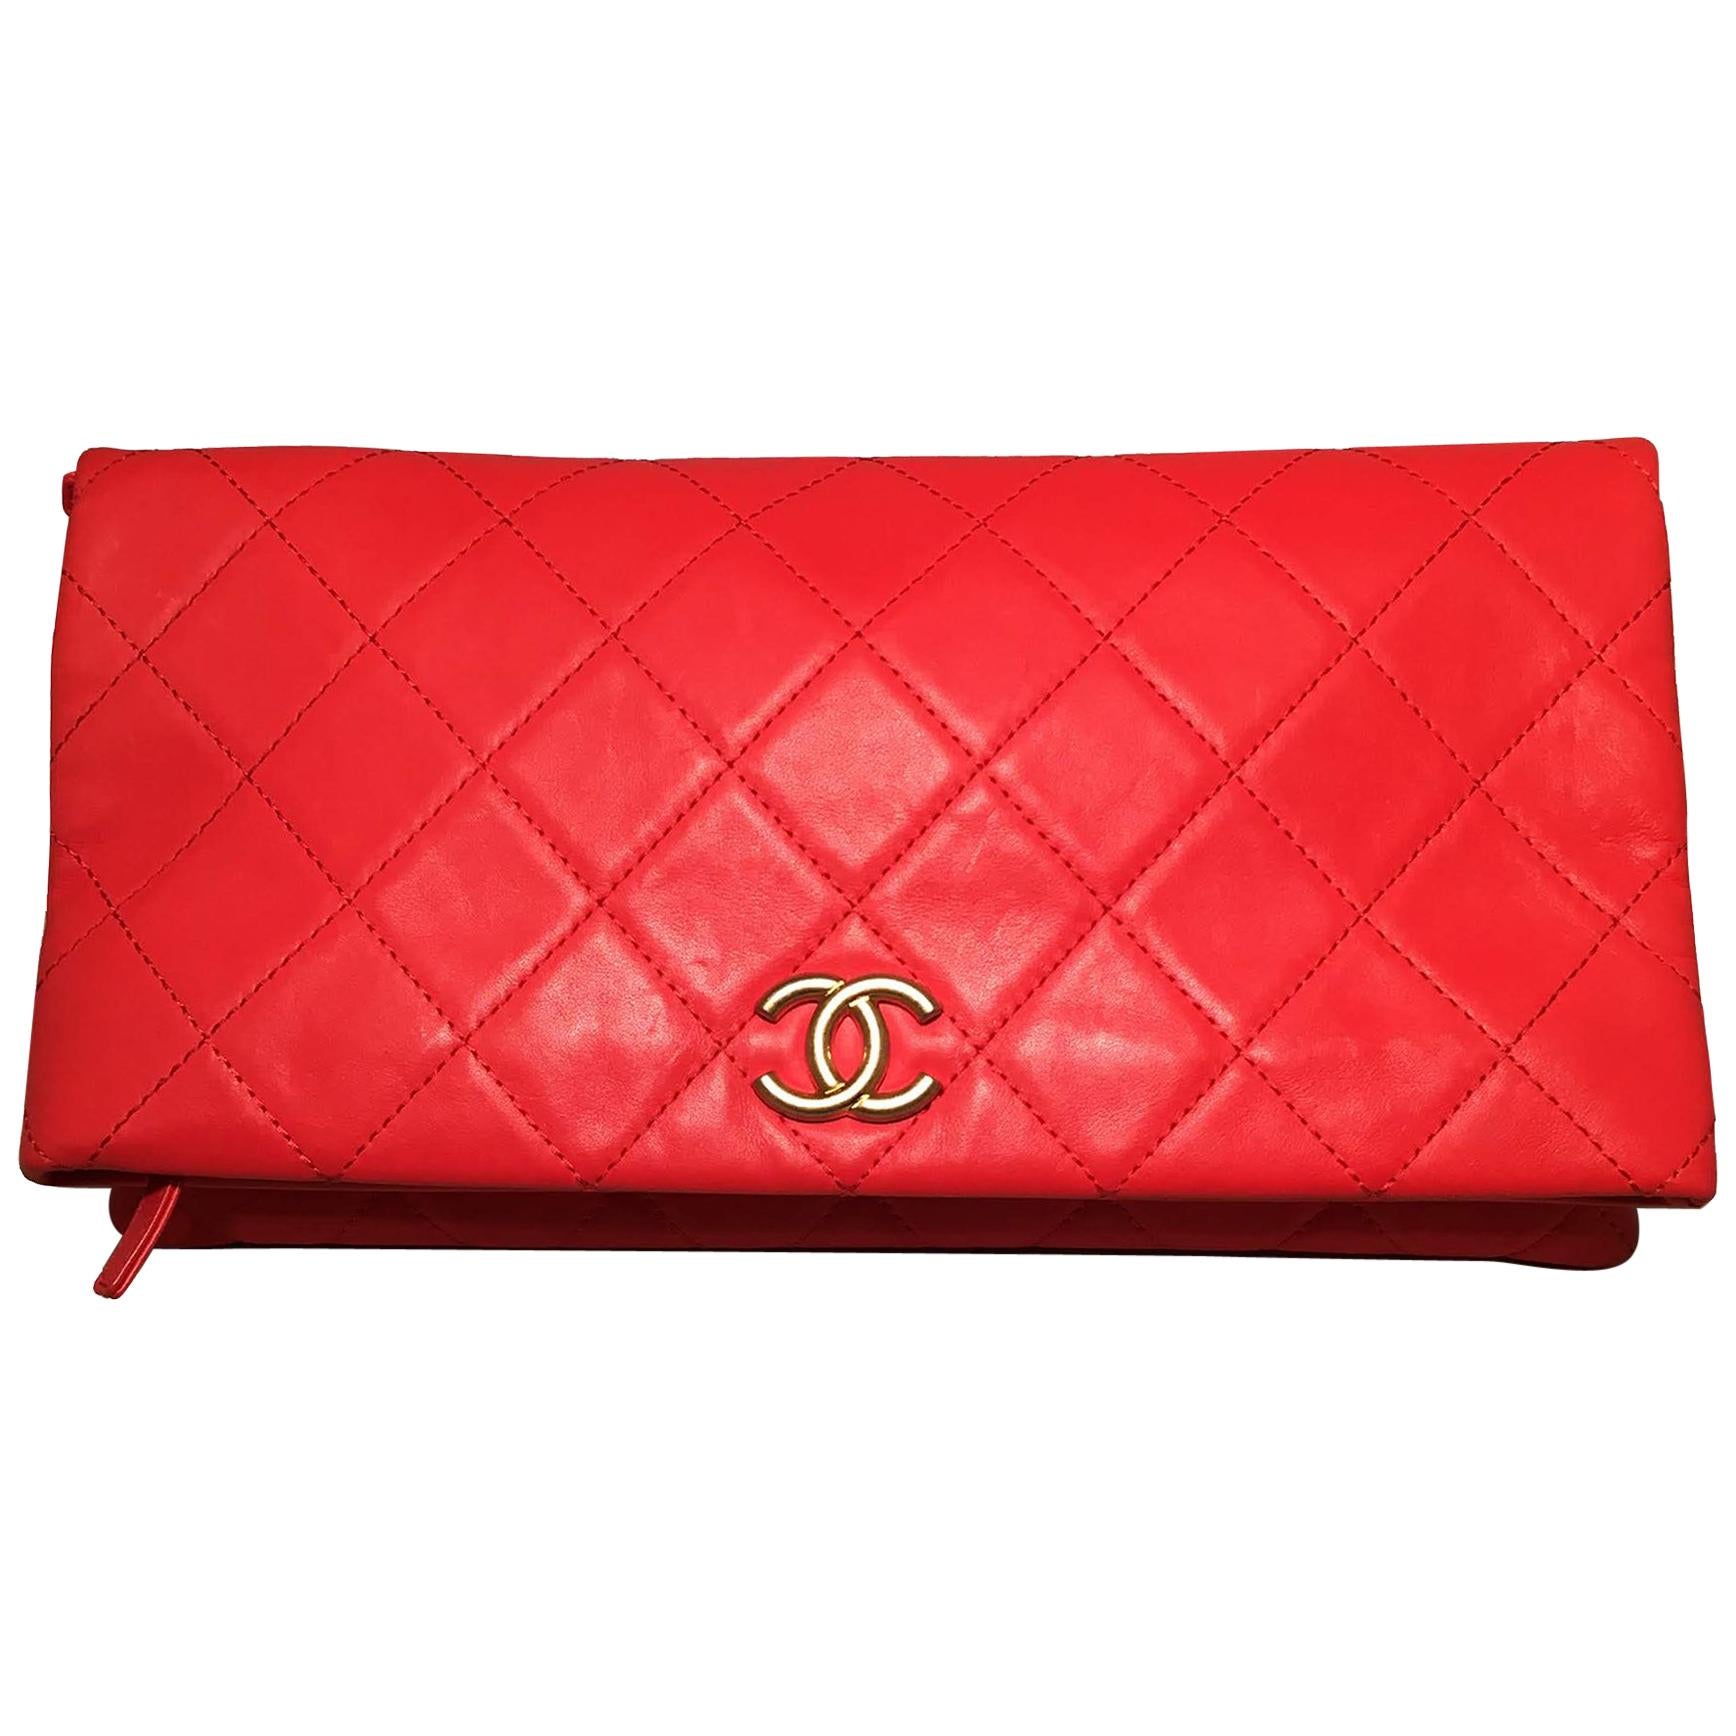 2018 Chanel Red Quilted Leather CC Fold Over Clutch